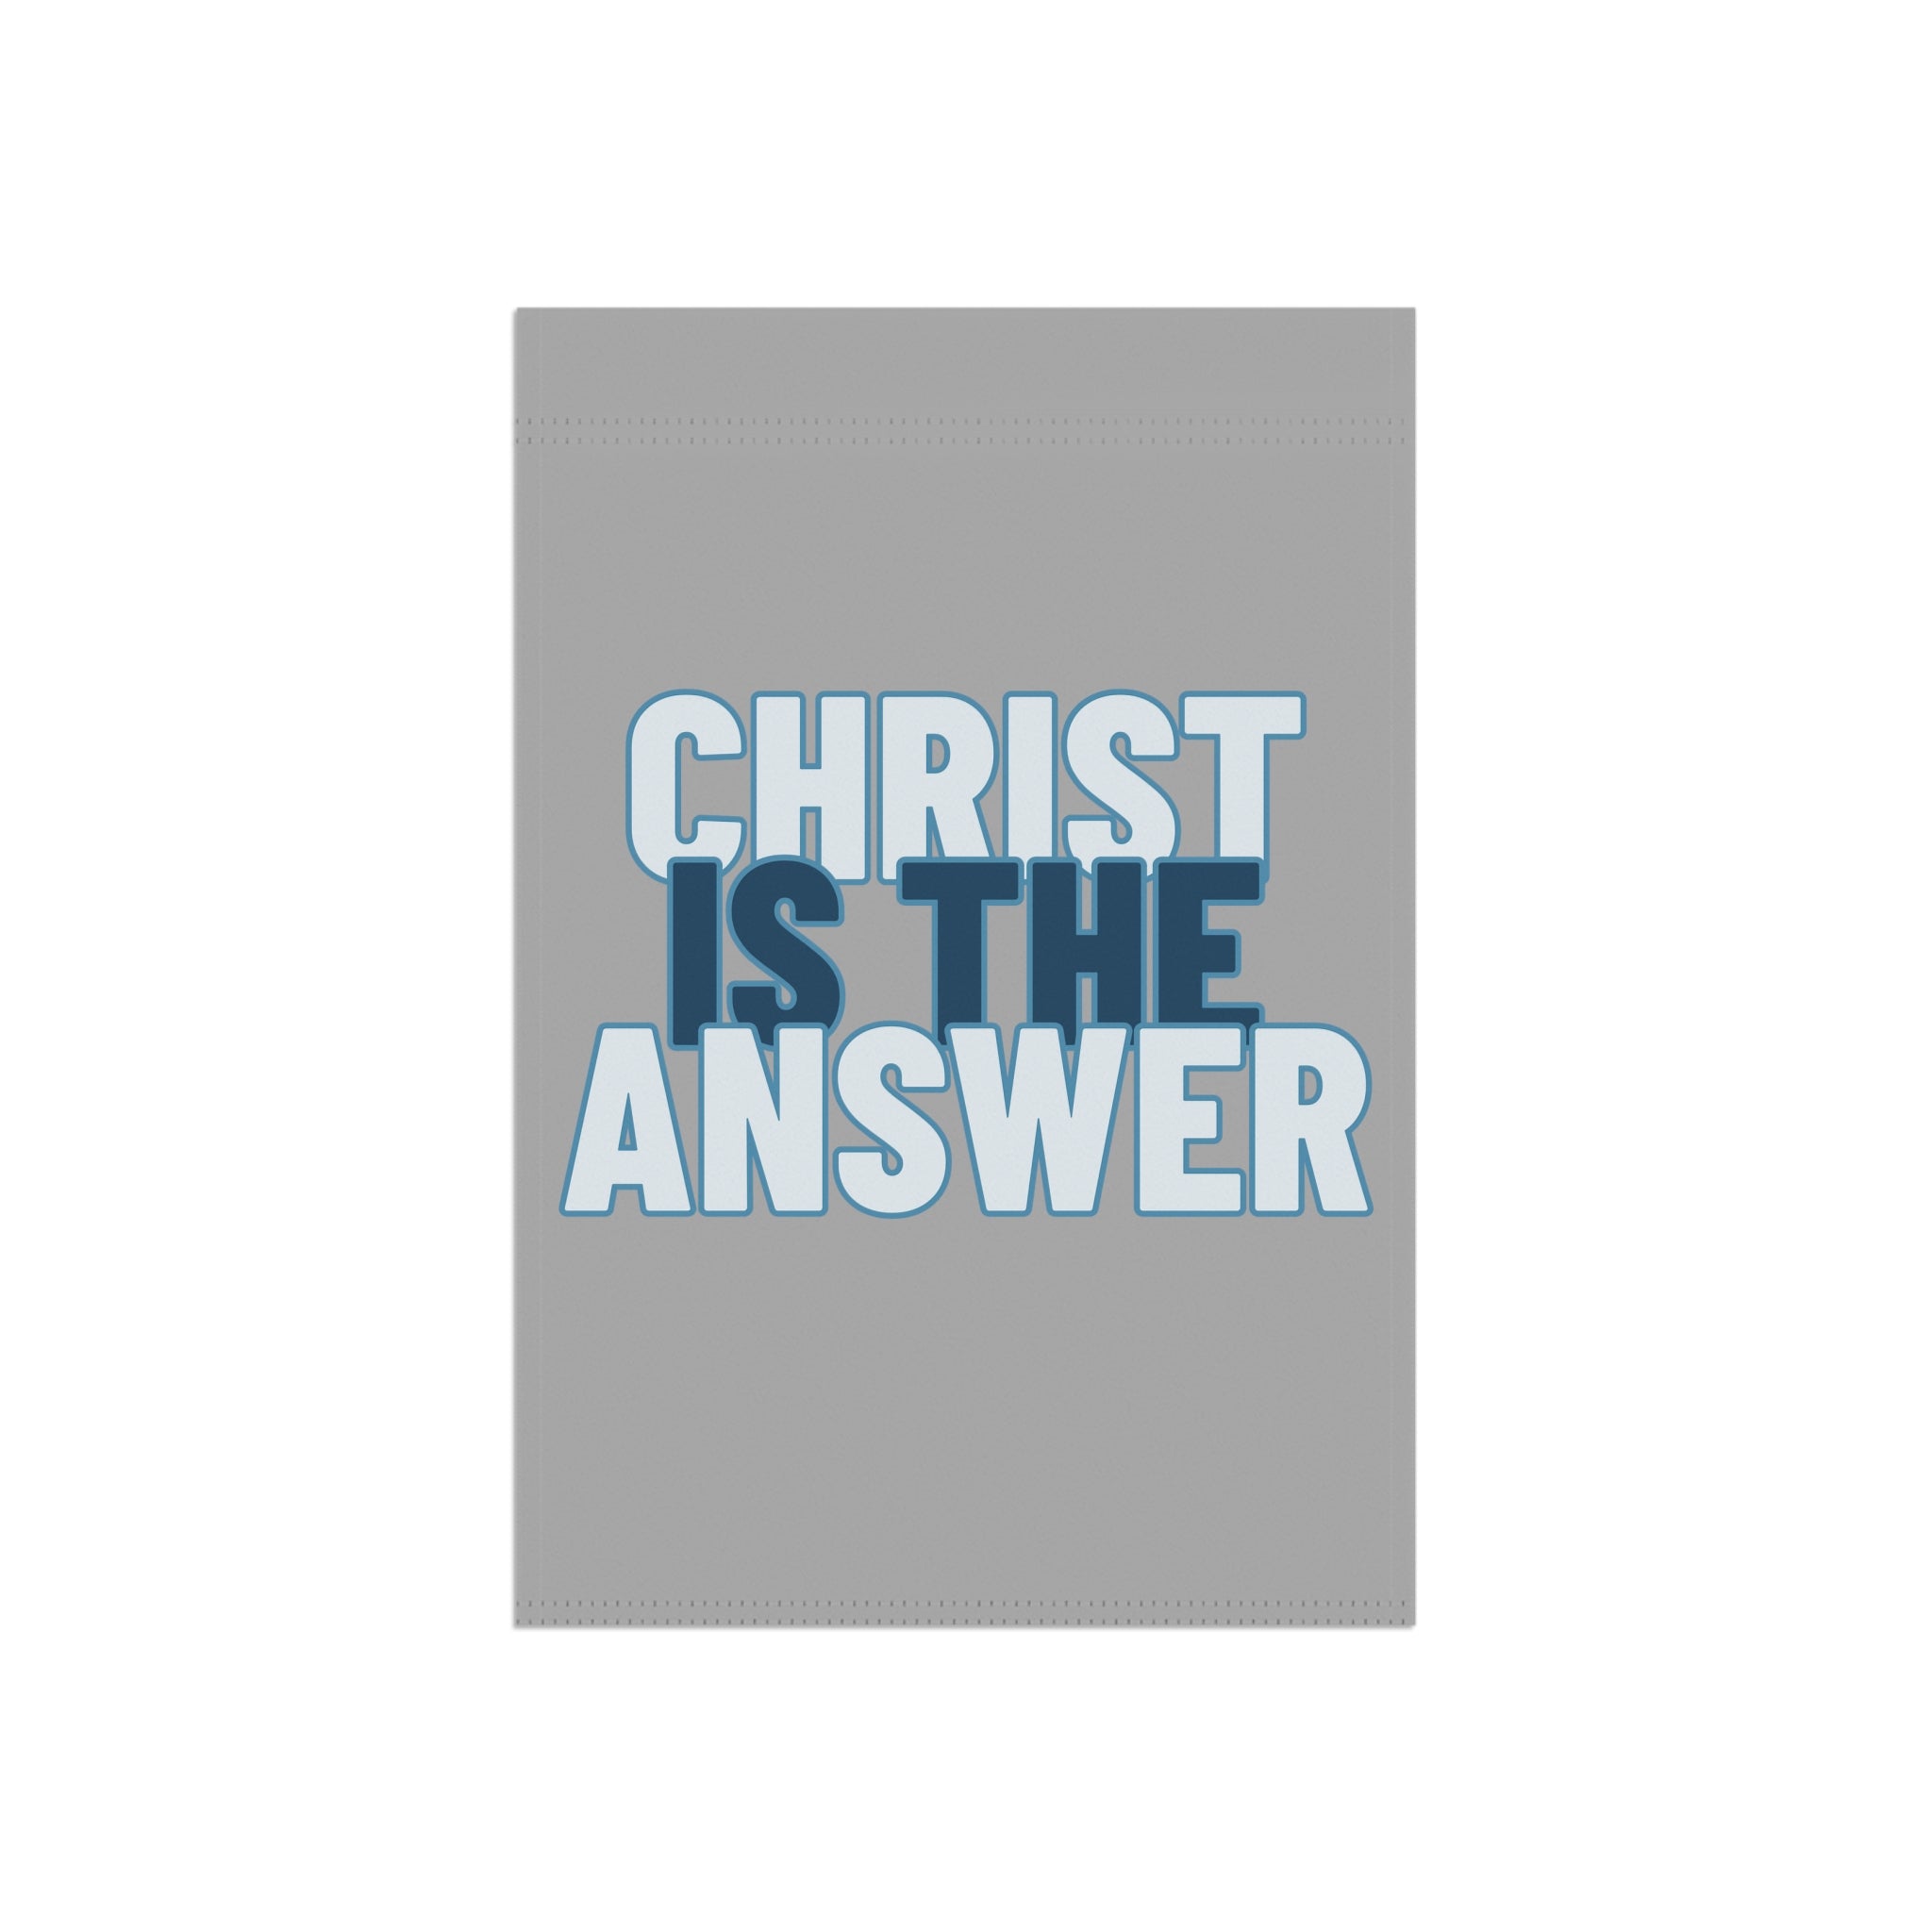 Christ is the answer garden flag